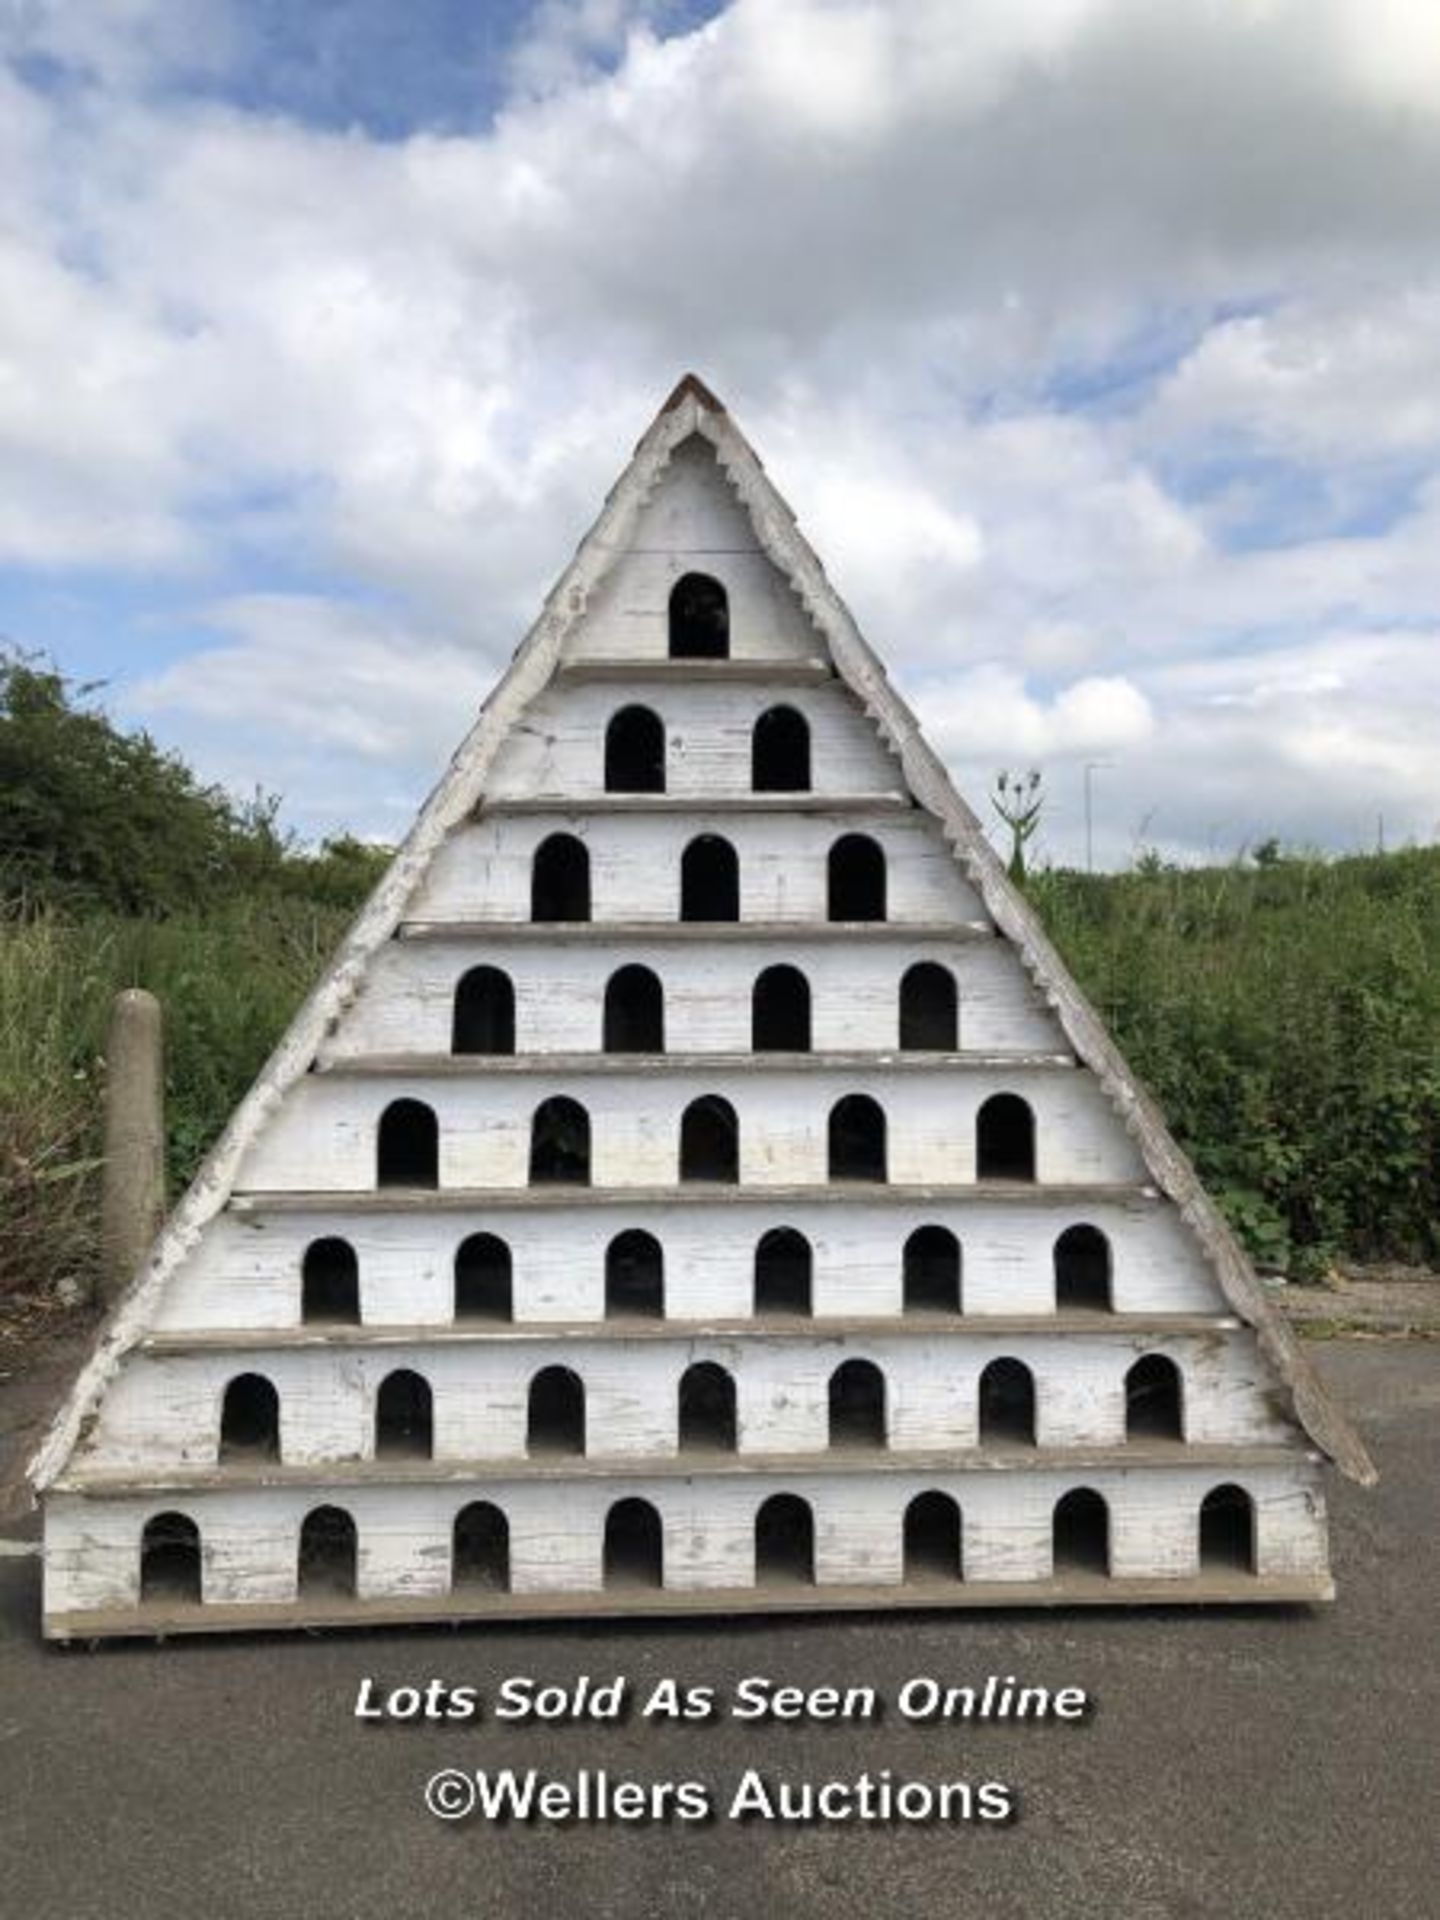 *LARGE TRADITIONAL HAND MADE DOVECOTE BIRDHOUSE, 36X SEPARATE NEST BOXES OVER 8 TIERS, TOTAL